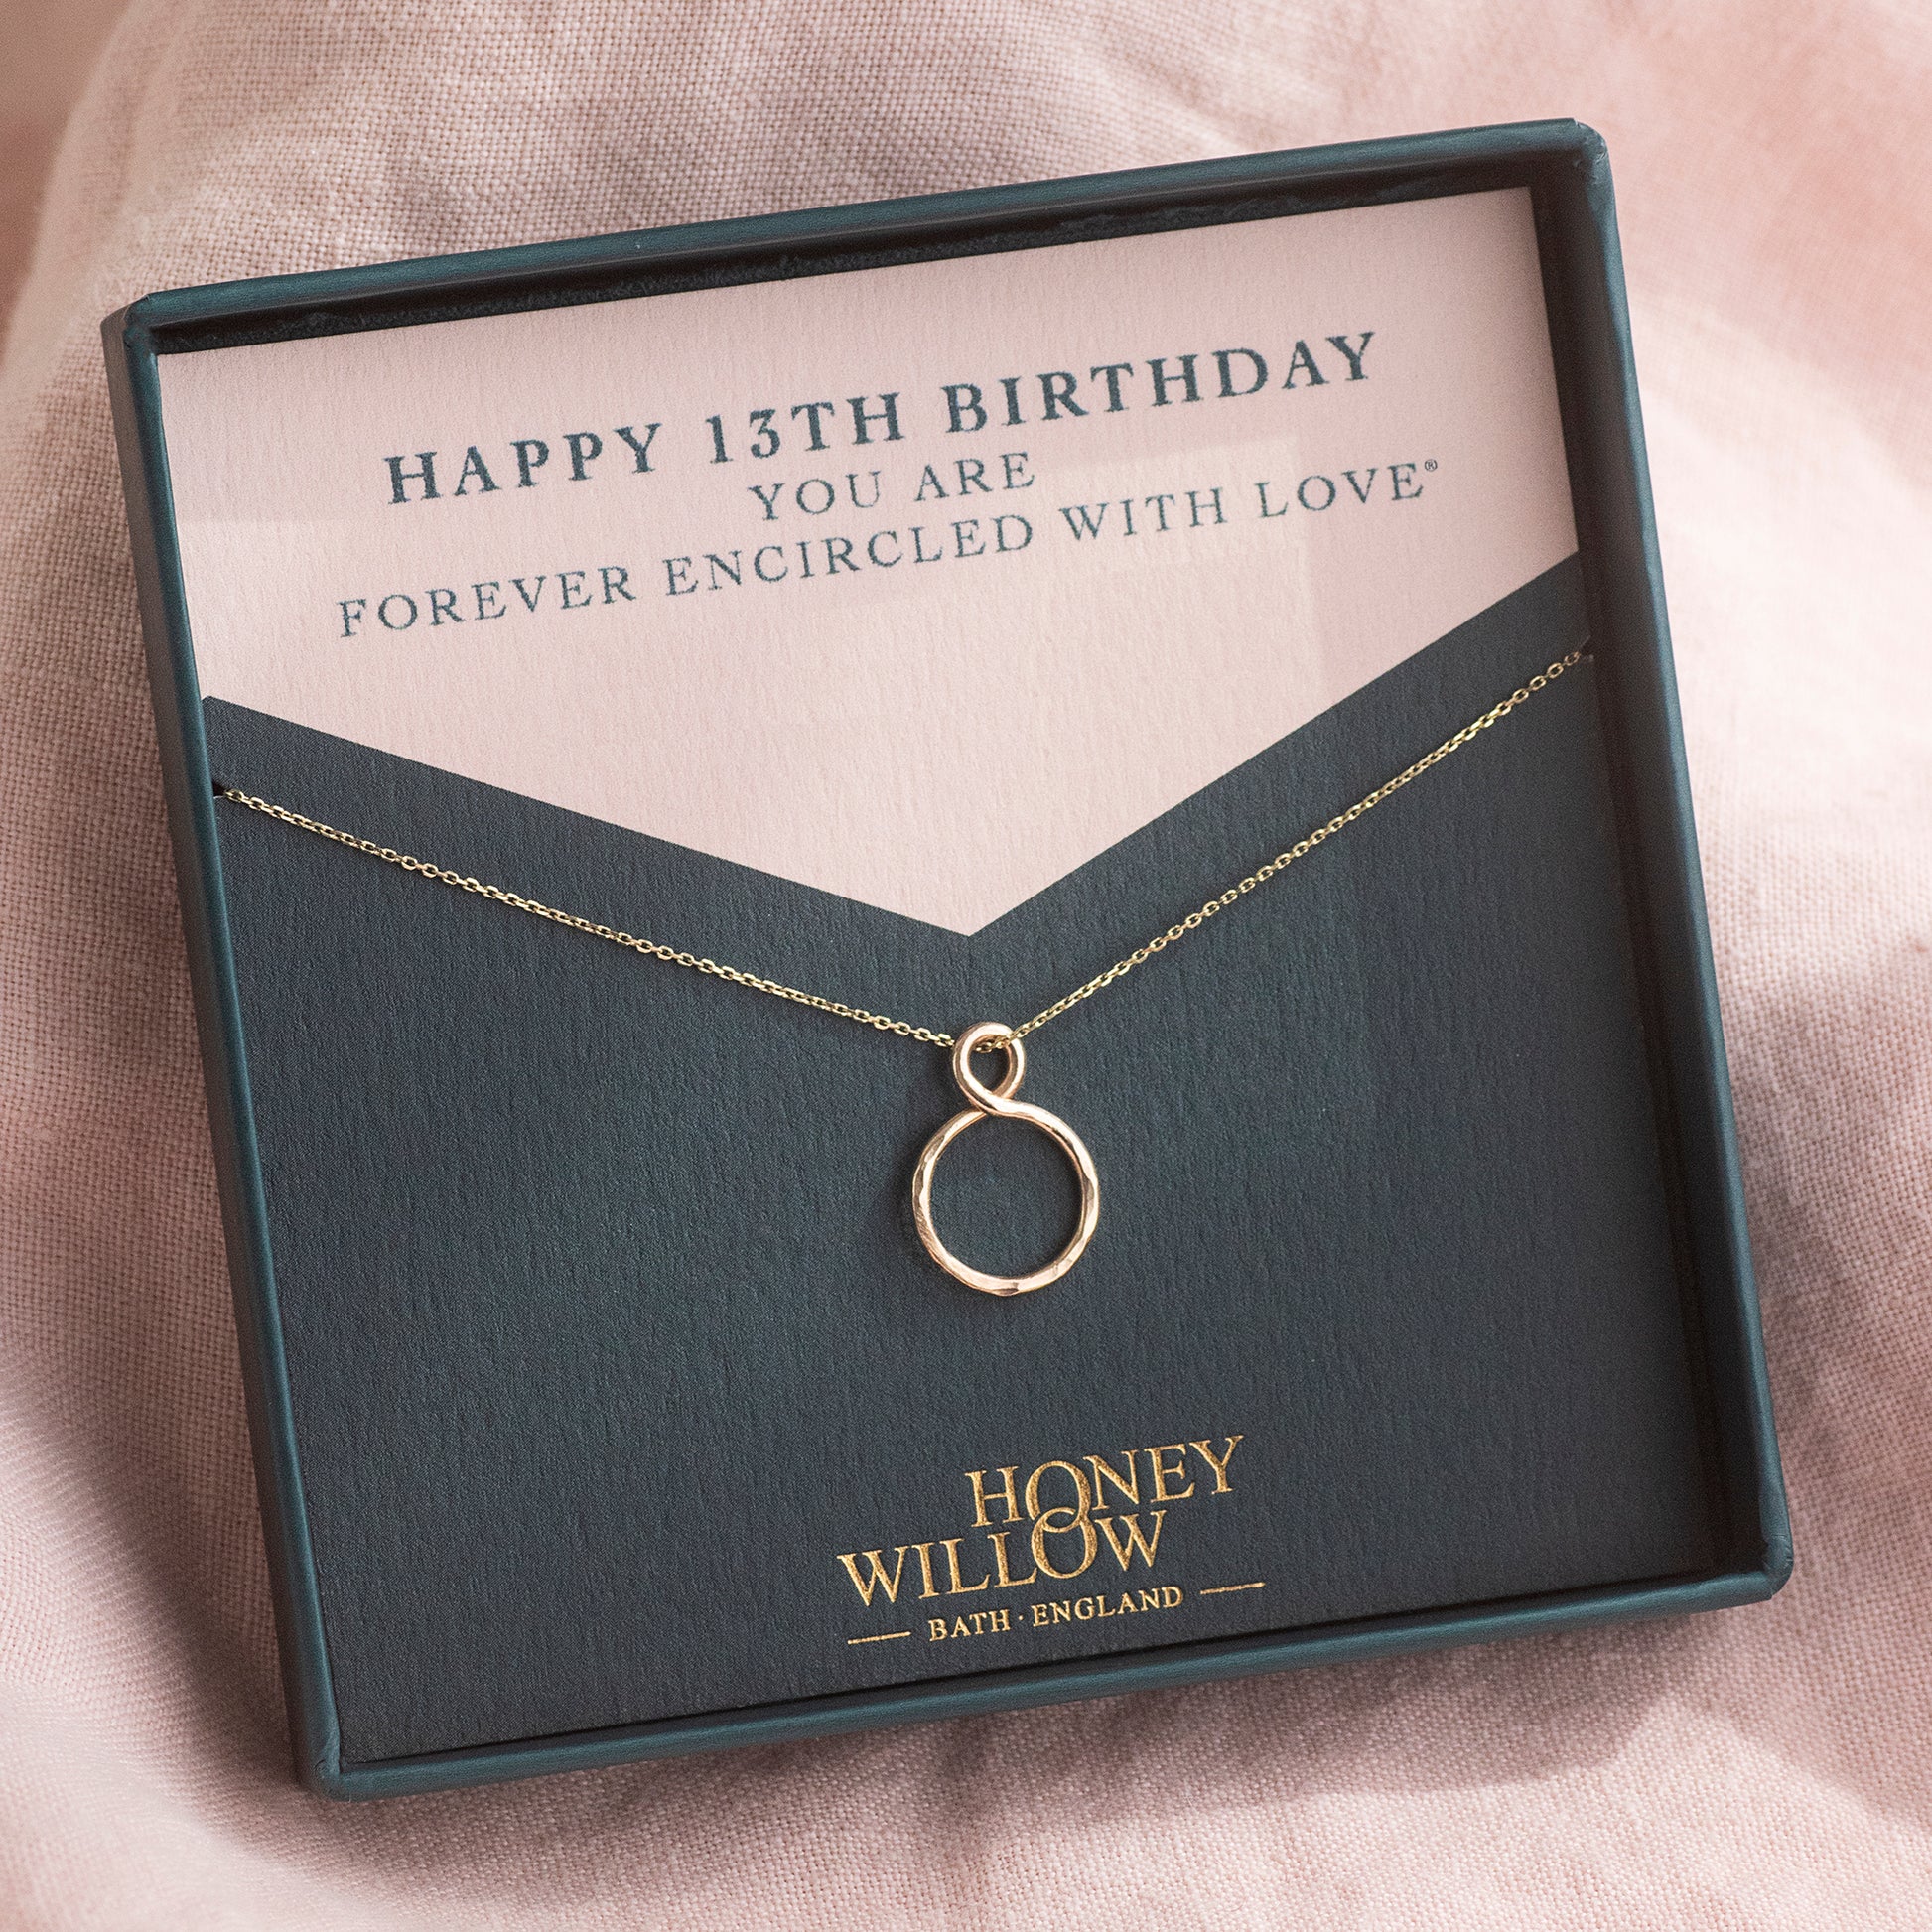 13th Birthday Gift Necklace - Tiny Infinity - 9kt Gold